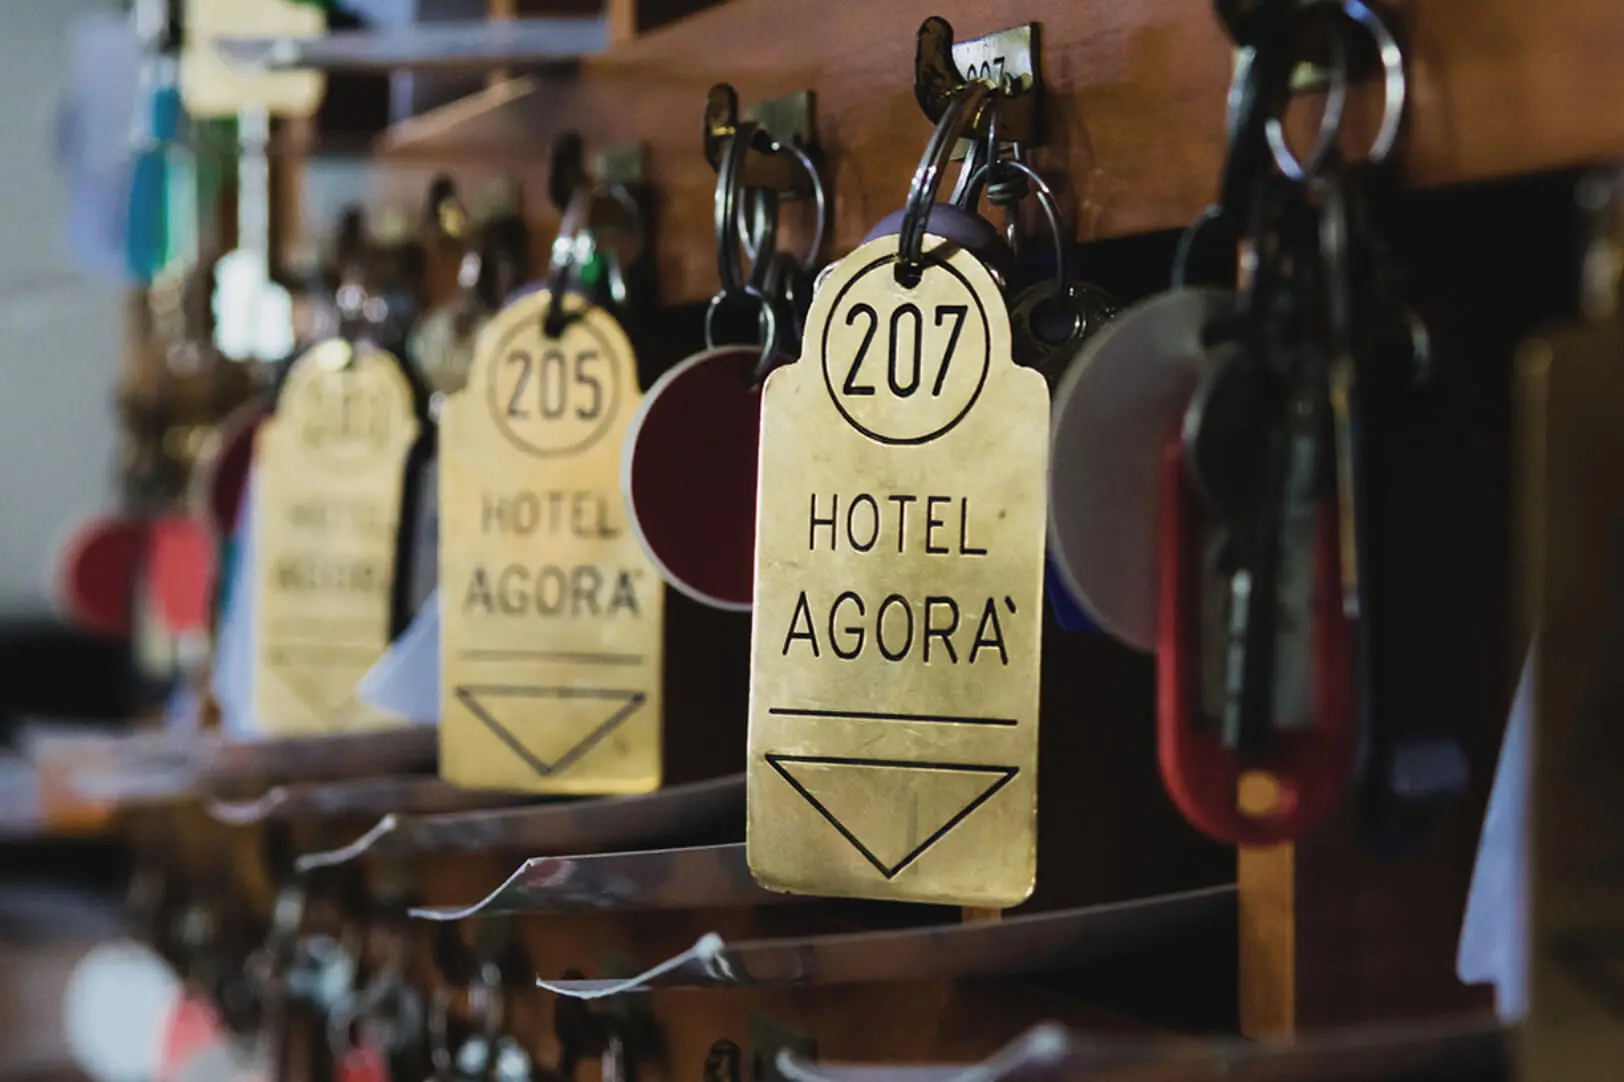 Hotel-Agora-reservations